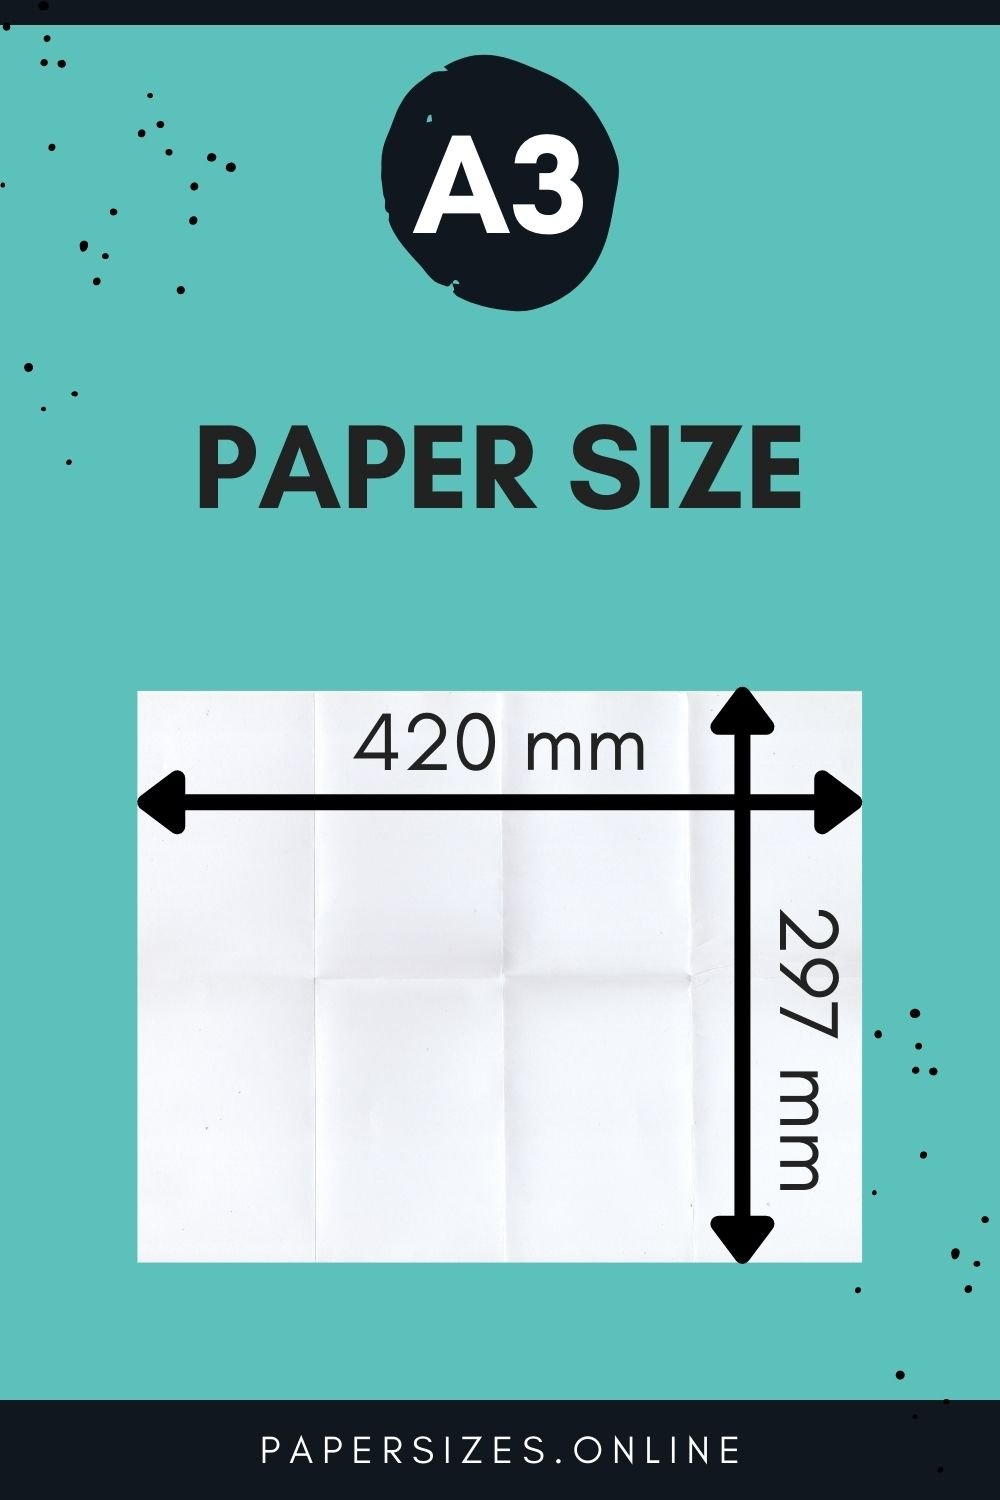 A3 Paper Size And Dimensions - Paper Sizes Online